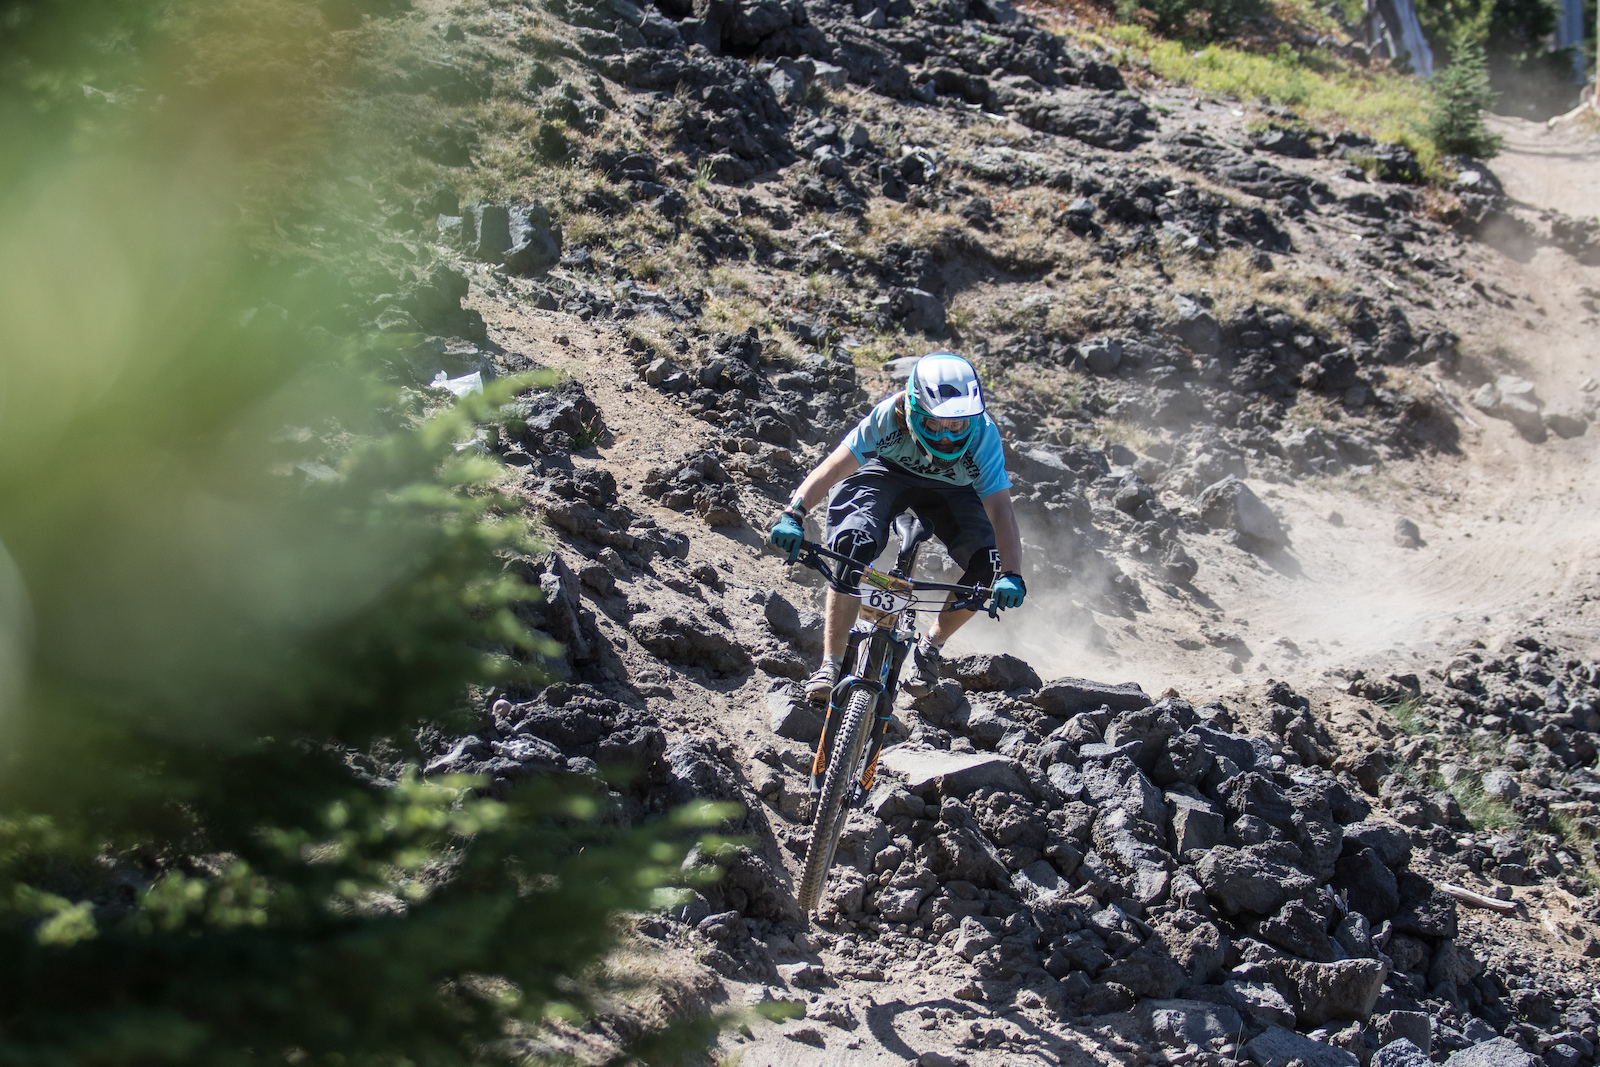 Alex Walker takes the win at the final 2016 Oregon Enduro Series race!